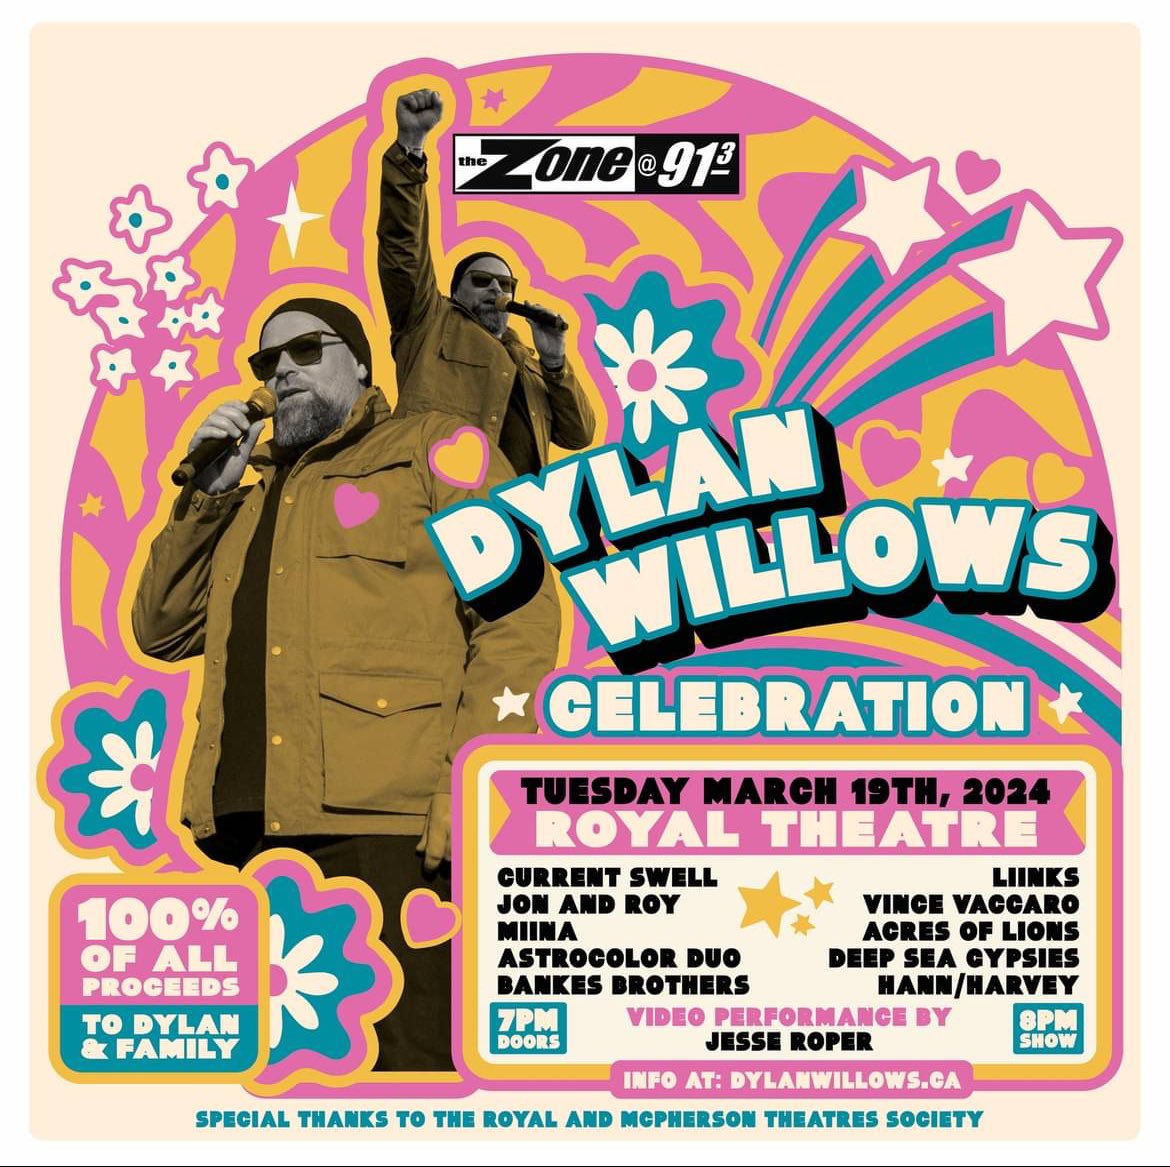 🌺⚡️🎙️JUST ANNOUNCED🎙️⚡️🌺 DYLAN WILLOWS CELEBRATION THE ROYAL THEATRE – MARCH 19, 2024 Featuring: @currentswell • @JonandRoy • Miina • @astrocolormusic • @BankesBrothers • @weareliinks • @VinceVaccaro • @acresoflions • & more! *100% of all proceeds go to DW and family